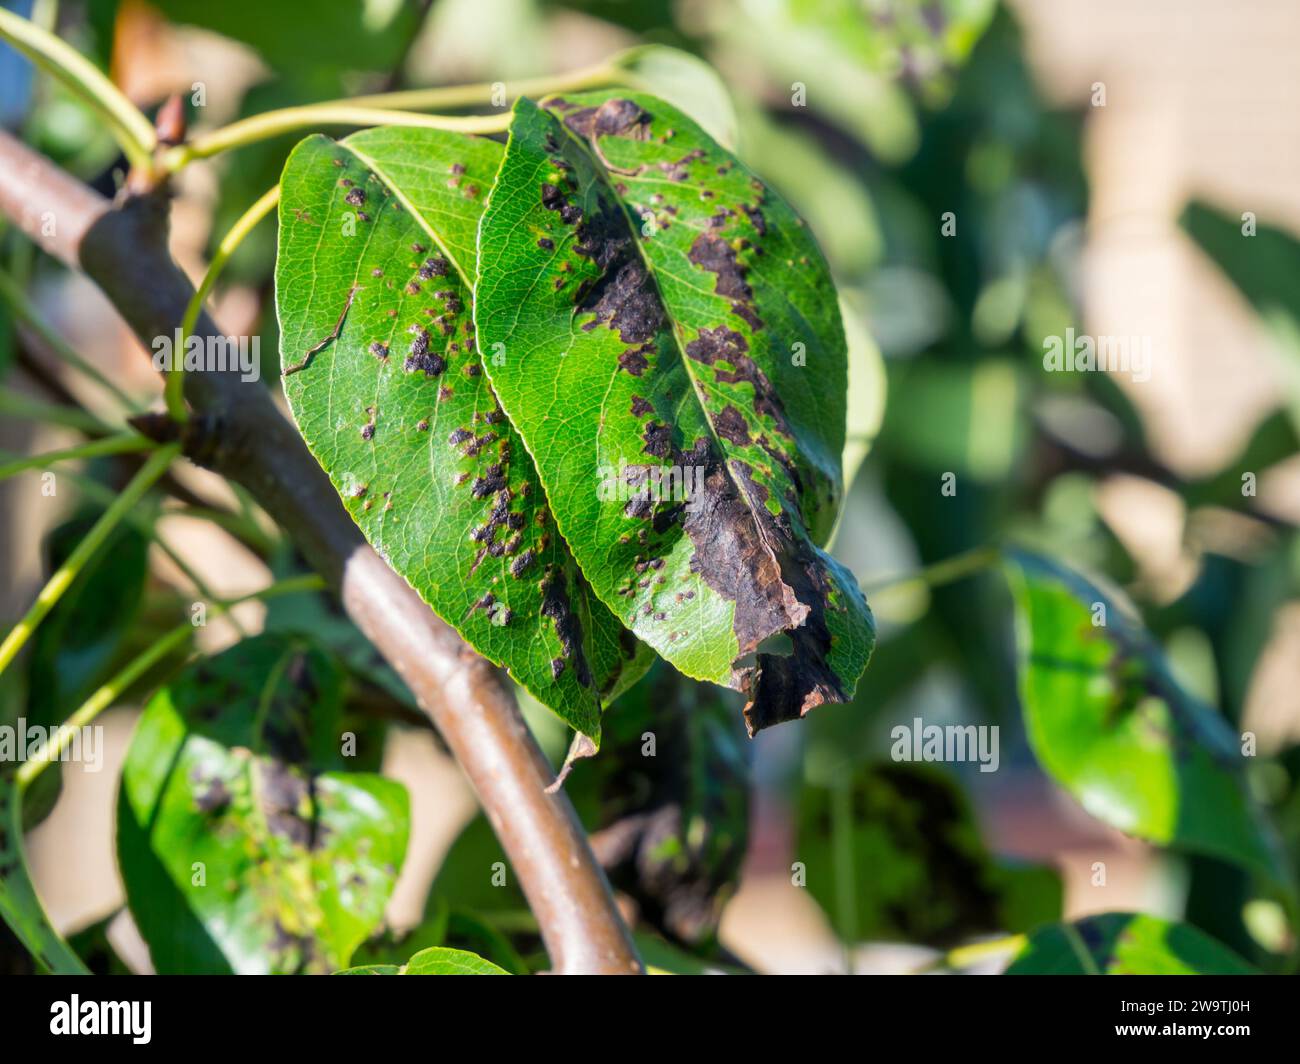 Blackened and twisted leaves of a young pear Stock Photo